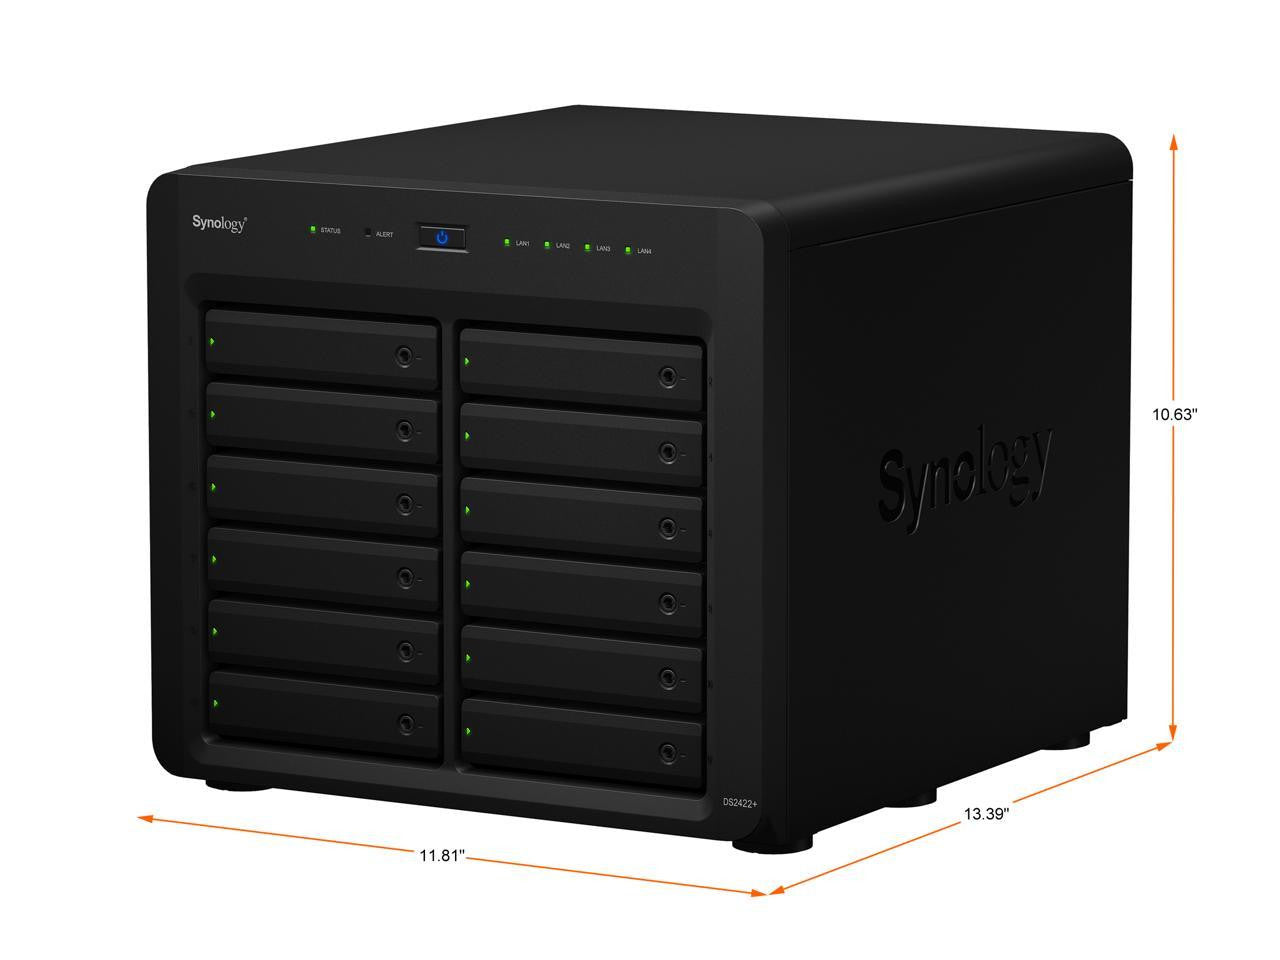 Synology DS2422+ Quad Core 2.2Ghz 12-Bay NAS with 4GB RAM and 96TB (12 x 8TB) of Synology Enterprise (HAT5300) Drives